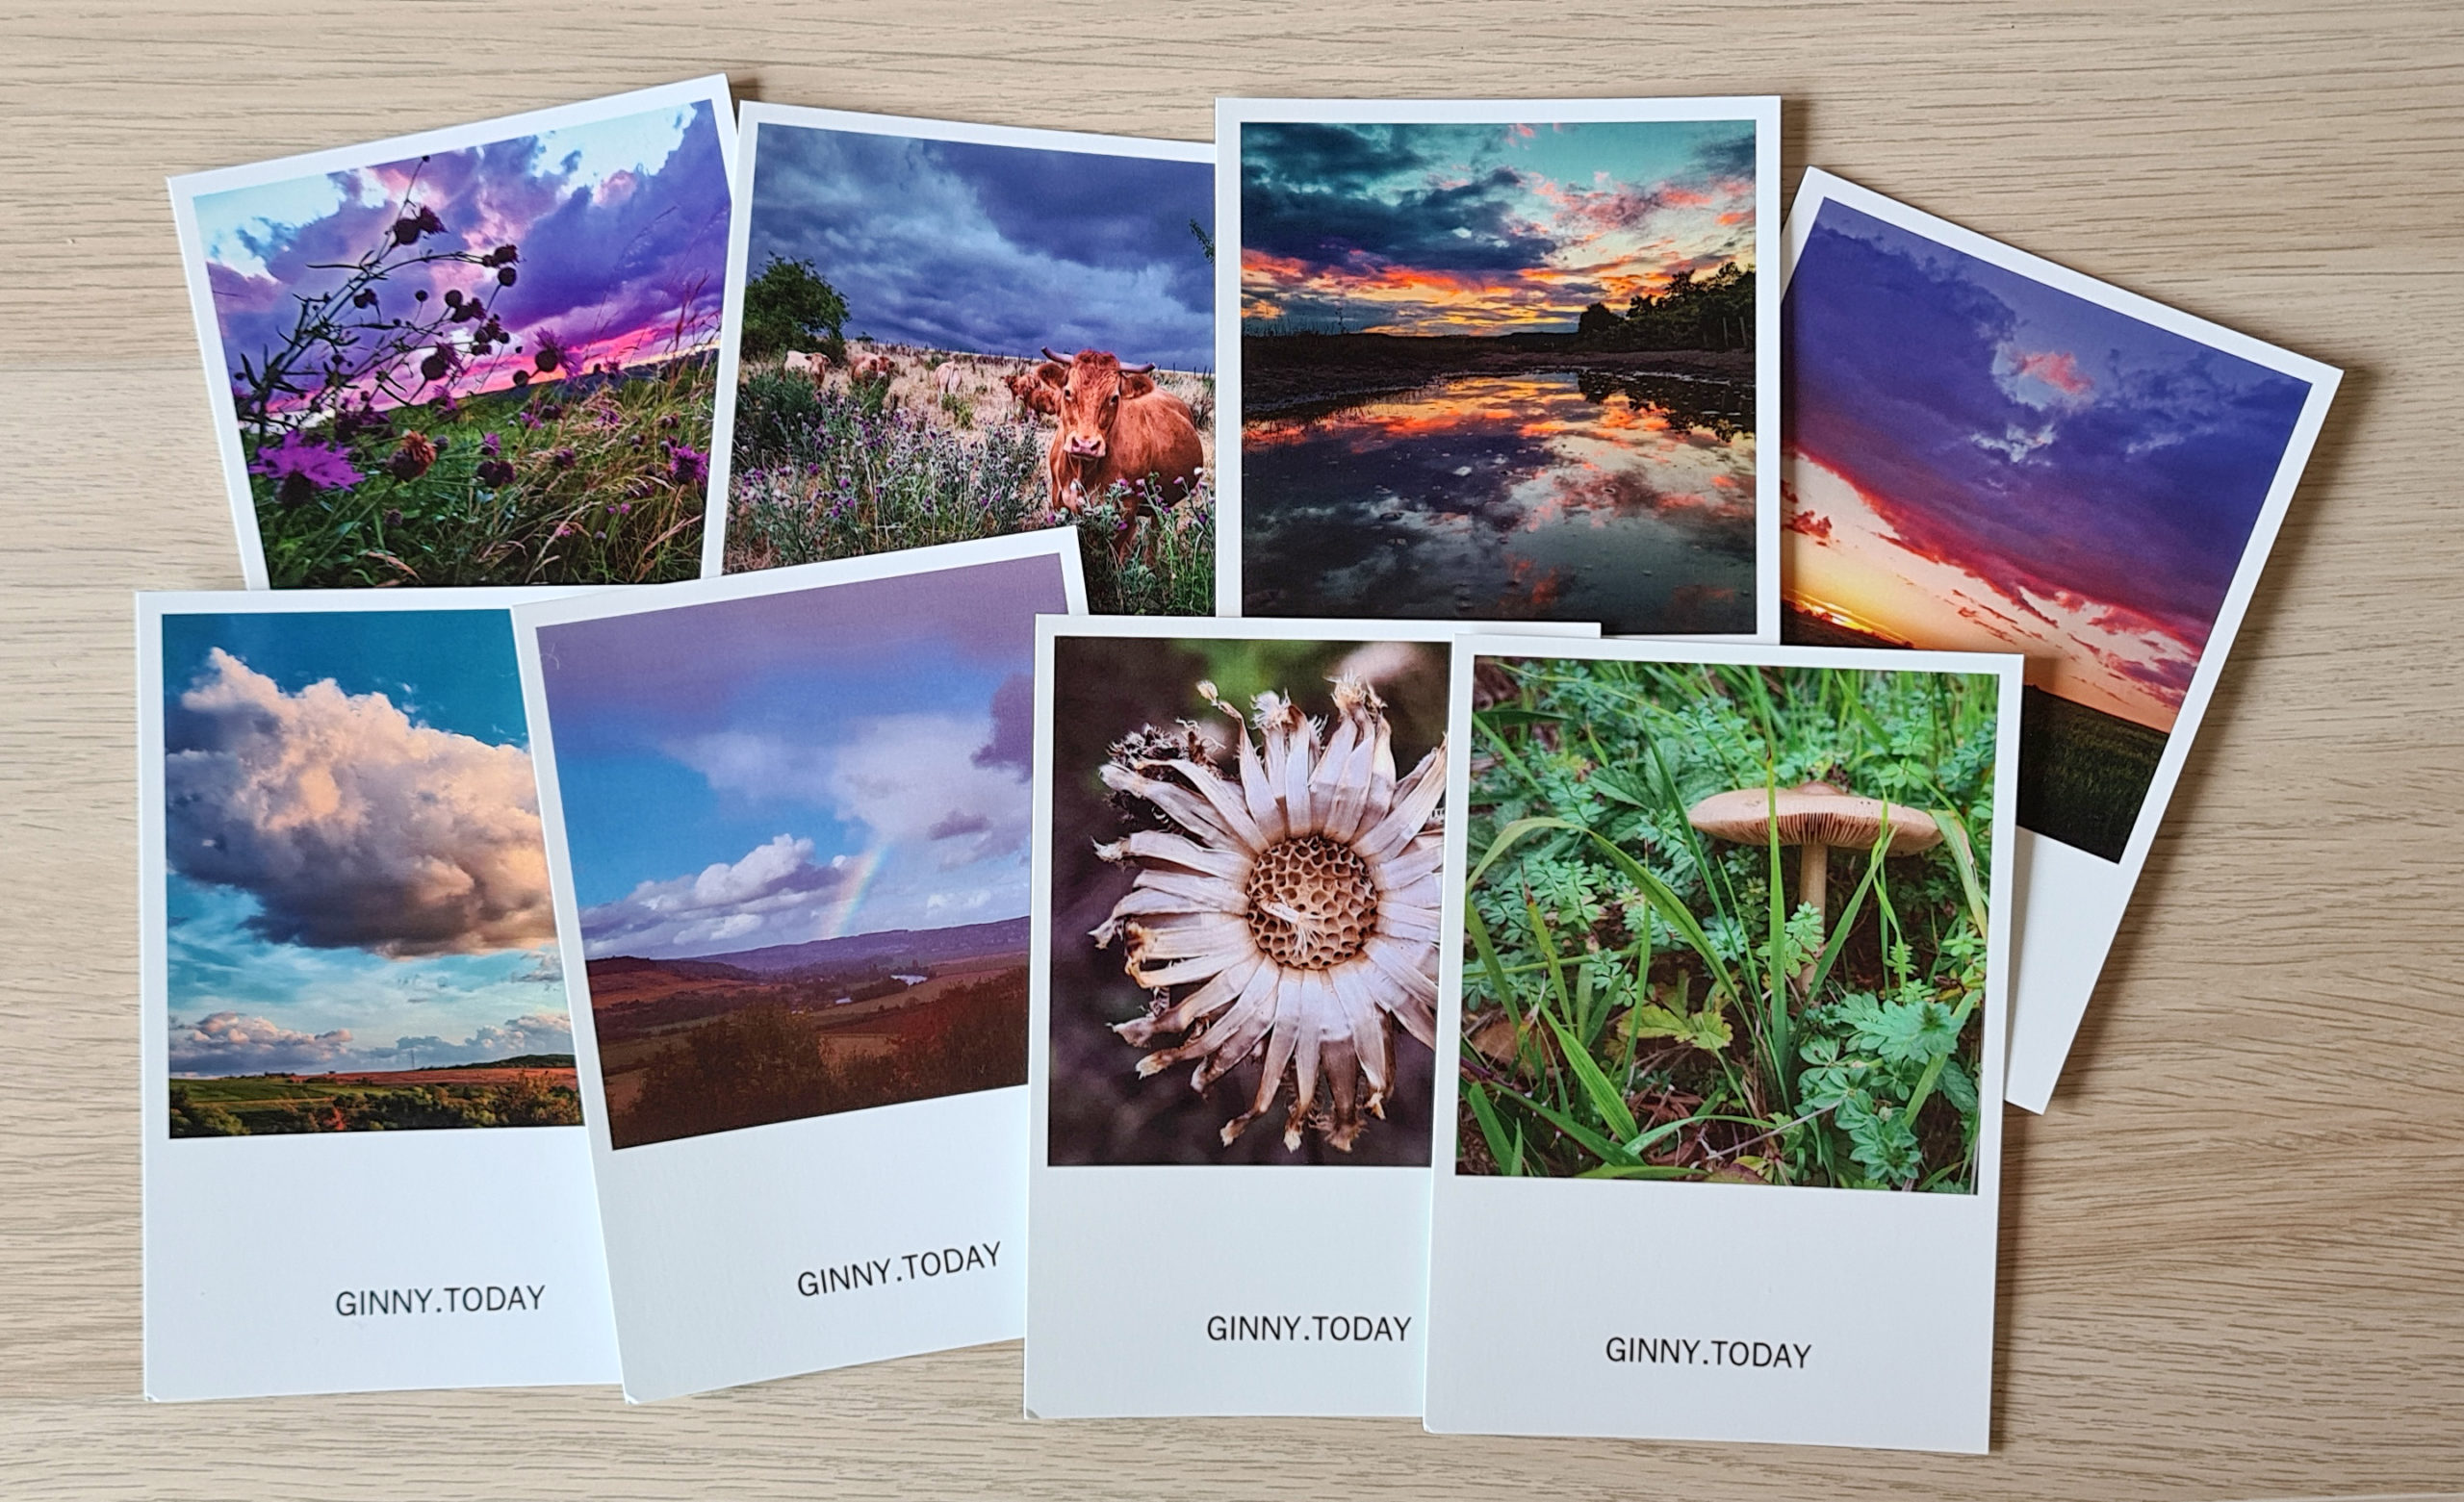 8 postcards that look like polaroids, each with colorful nature photos on them, and text that says "Ginny.Today"